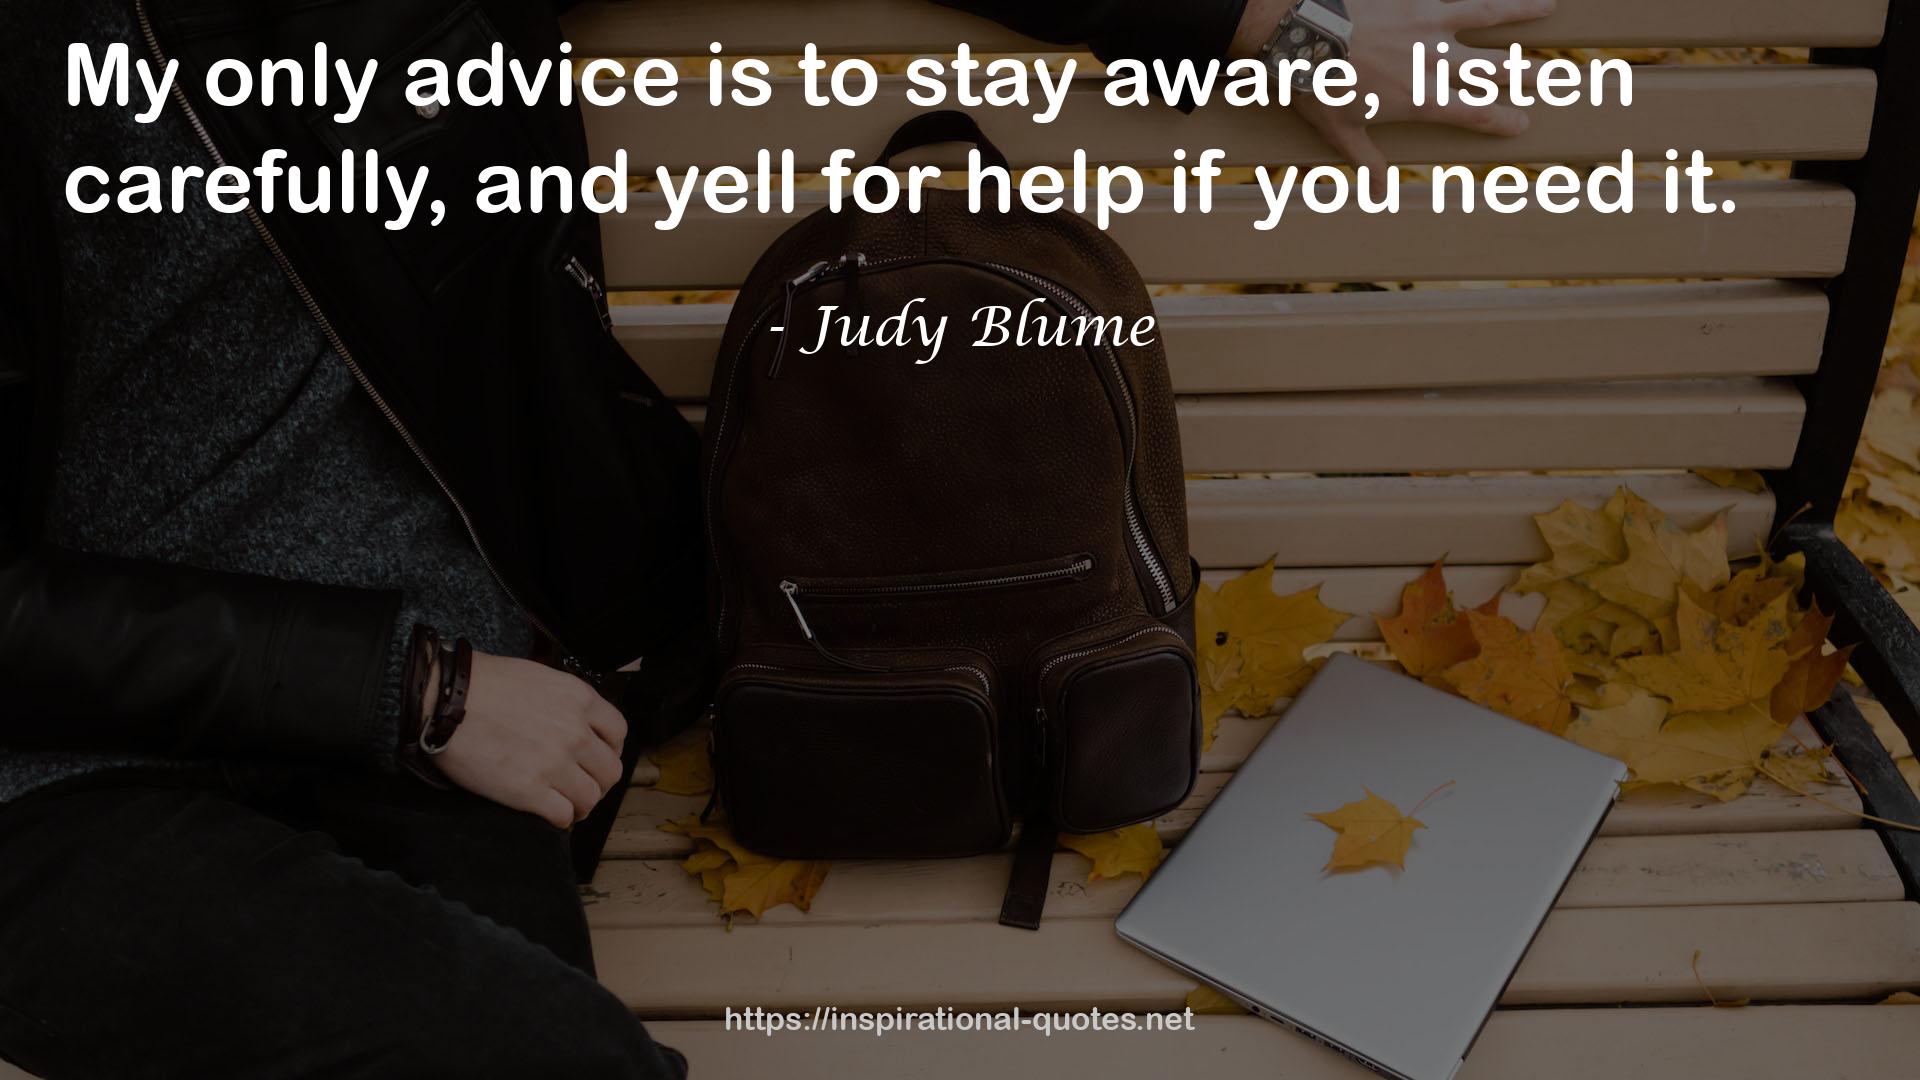 Judy Blume QUOTES